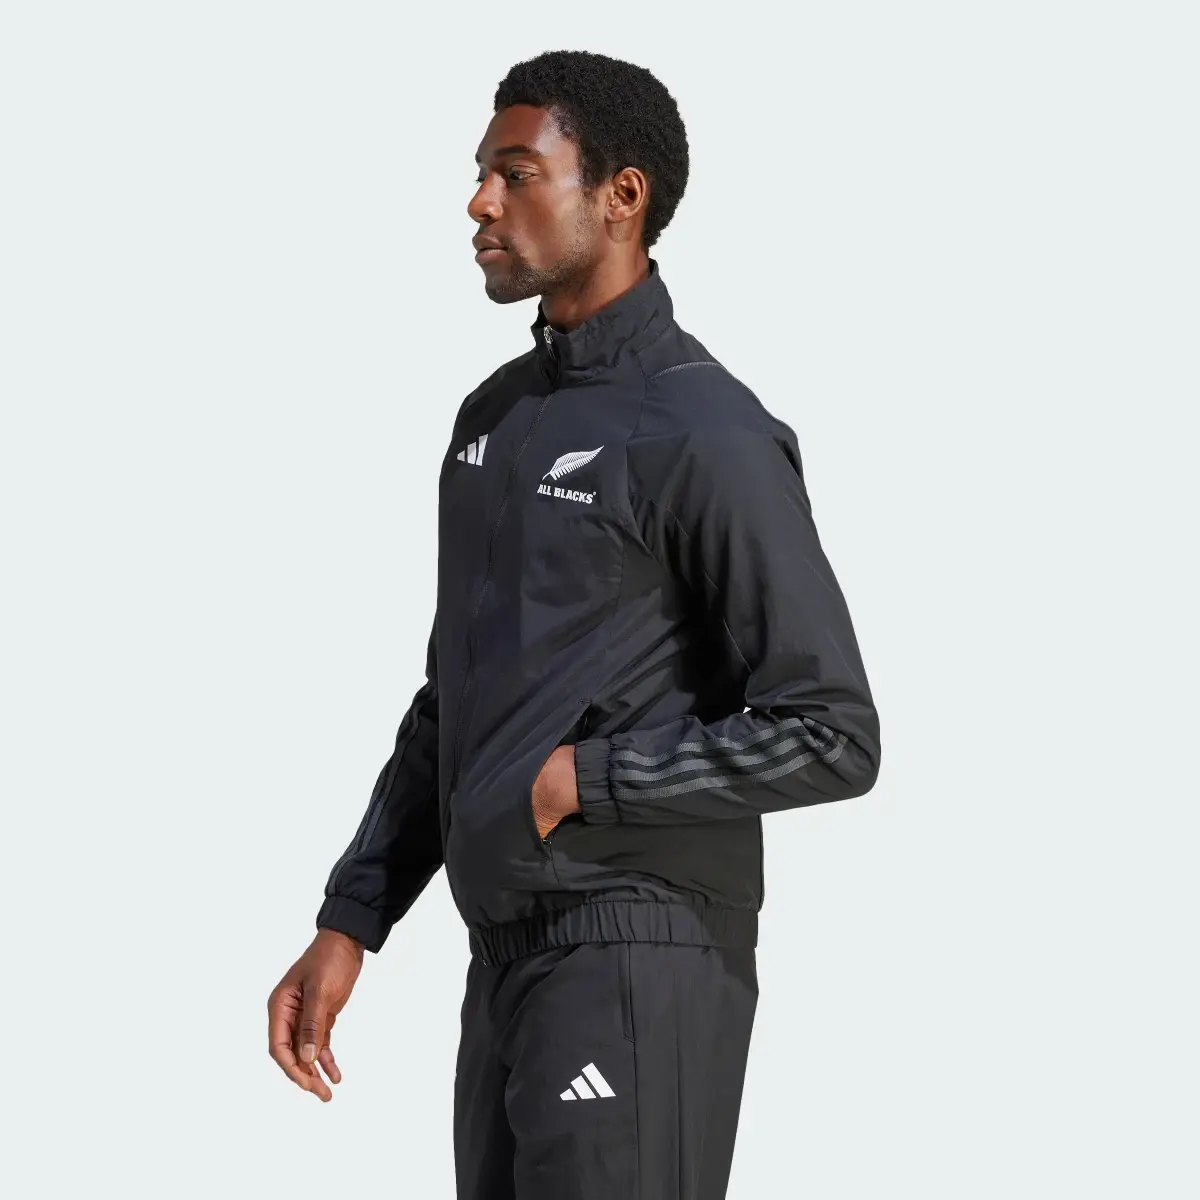 Adidas All Blacks Rugby Track Suit Track Top. 3